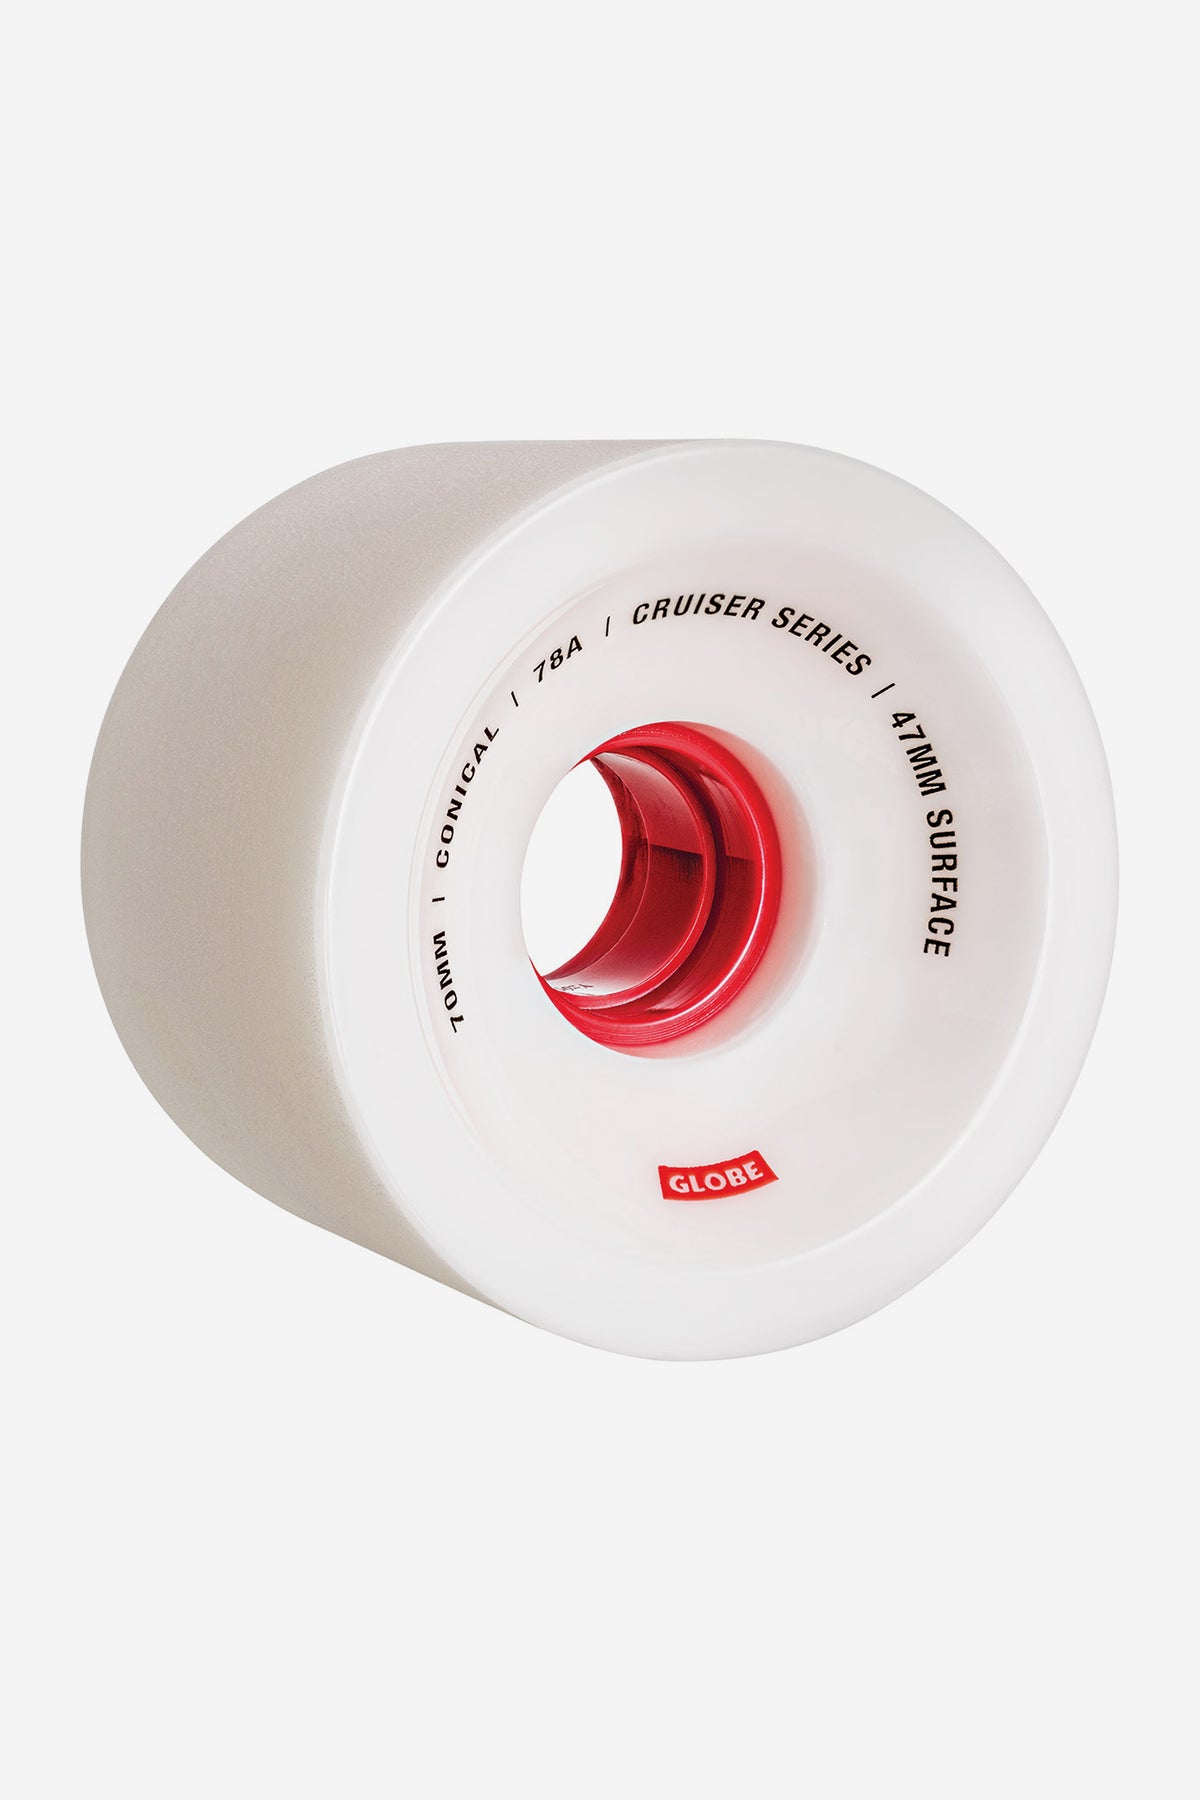 detail of Conical Cruiser Wheel 70mm - white/red